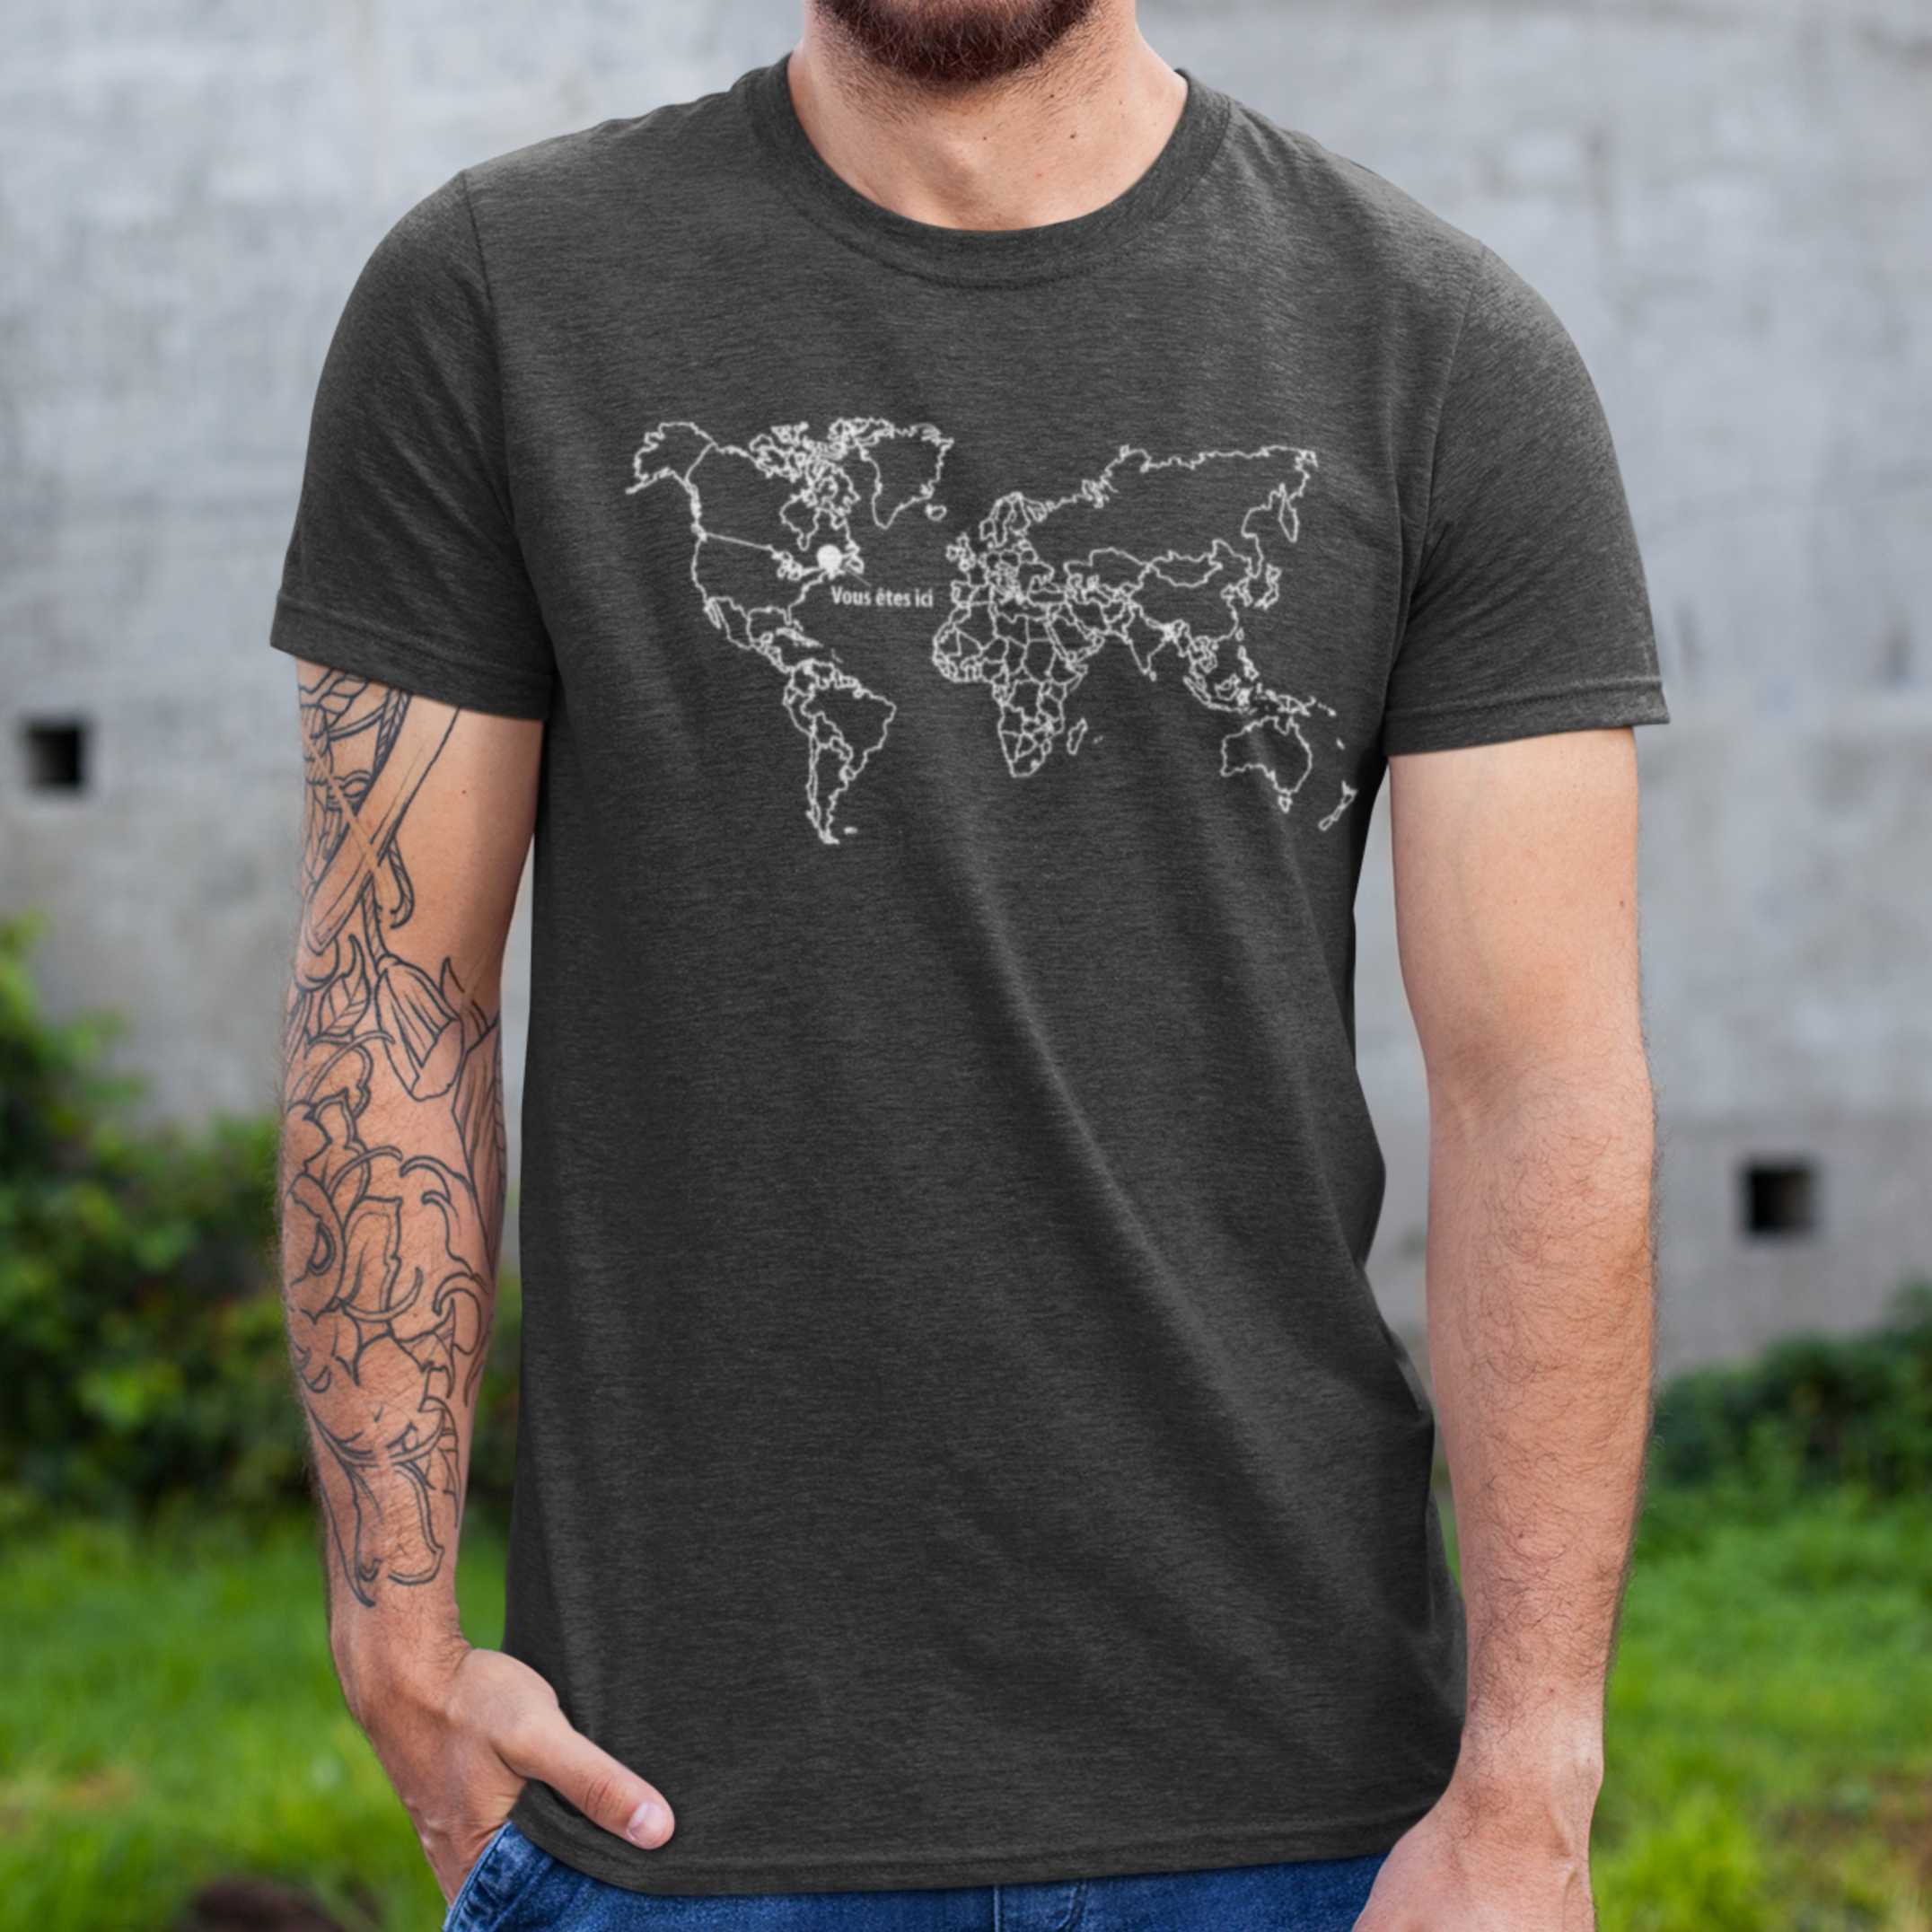 You Are Here - Men's/Unisex T-Shirt